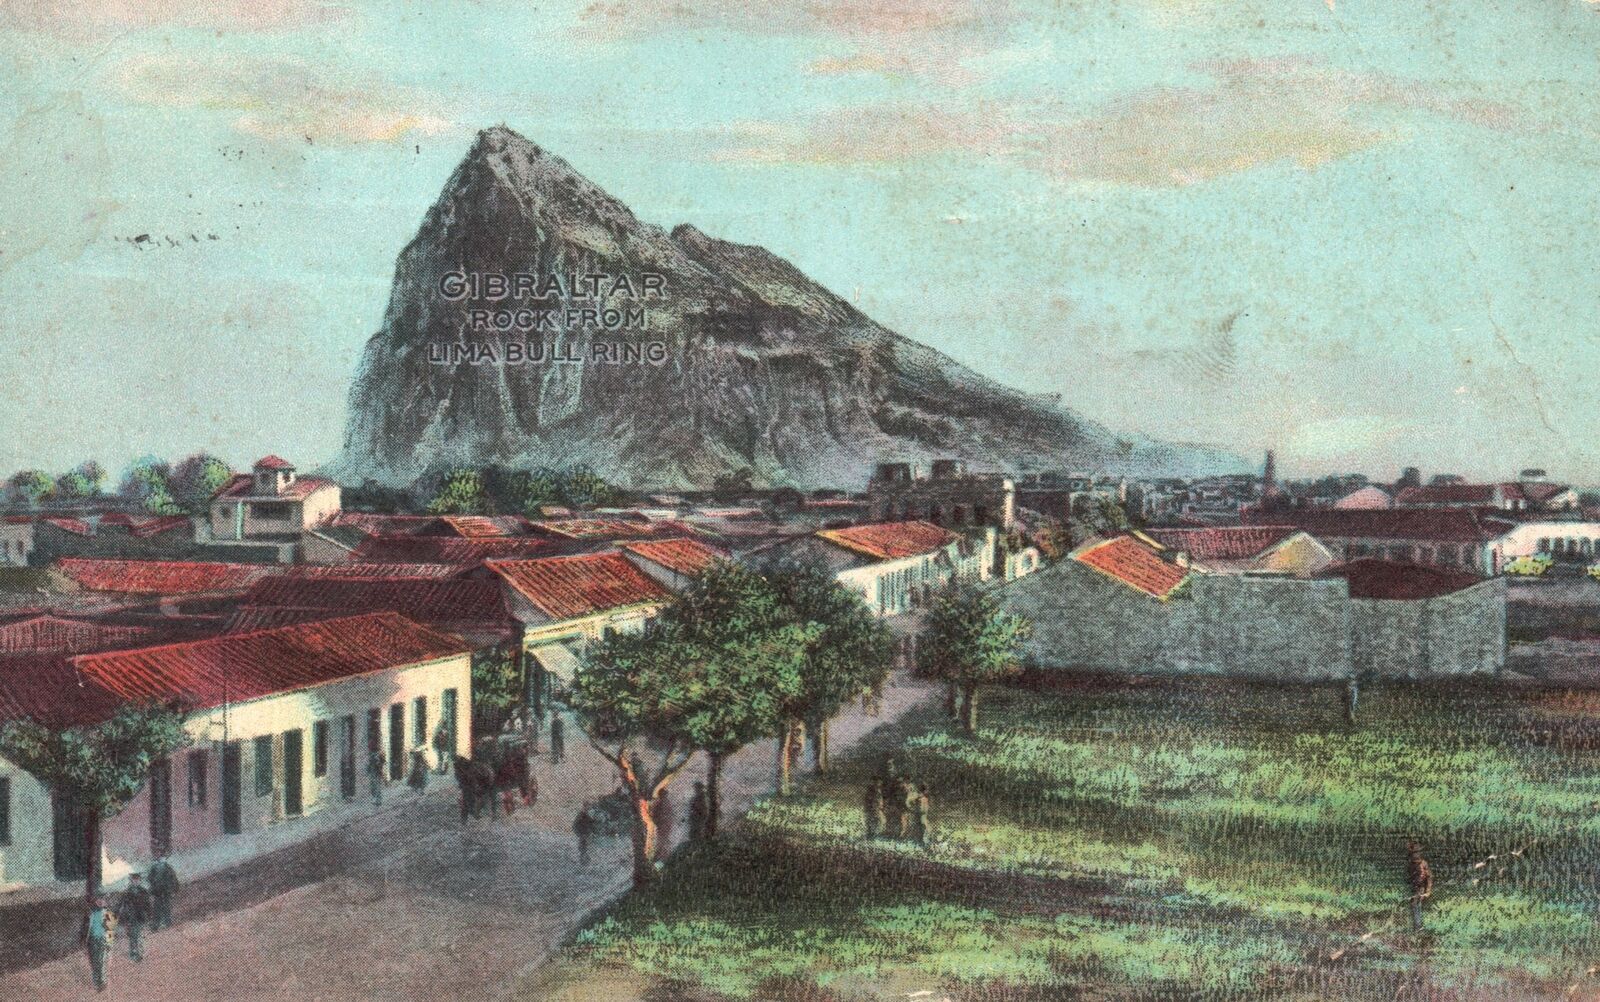 Vintage Postcard 1910 Gibraltar Rock Tourist Attraction From Lima Ball Ring